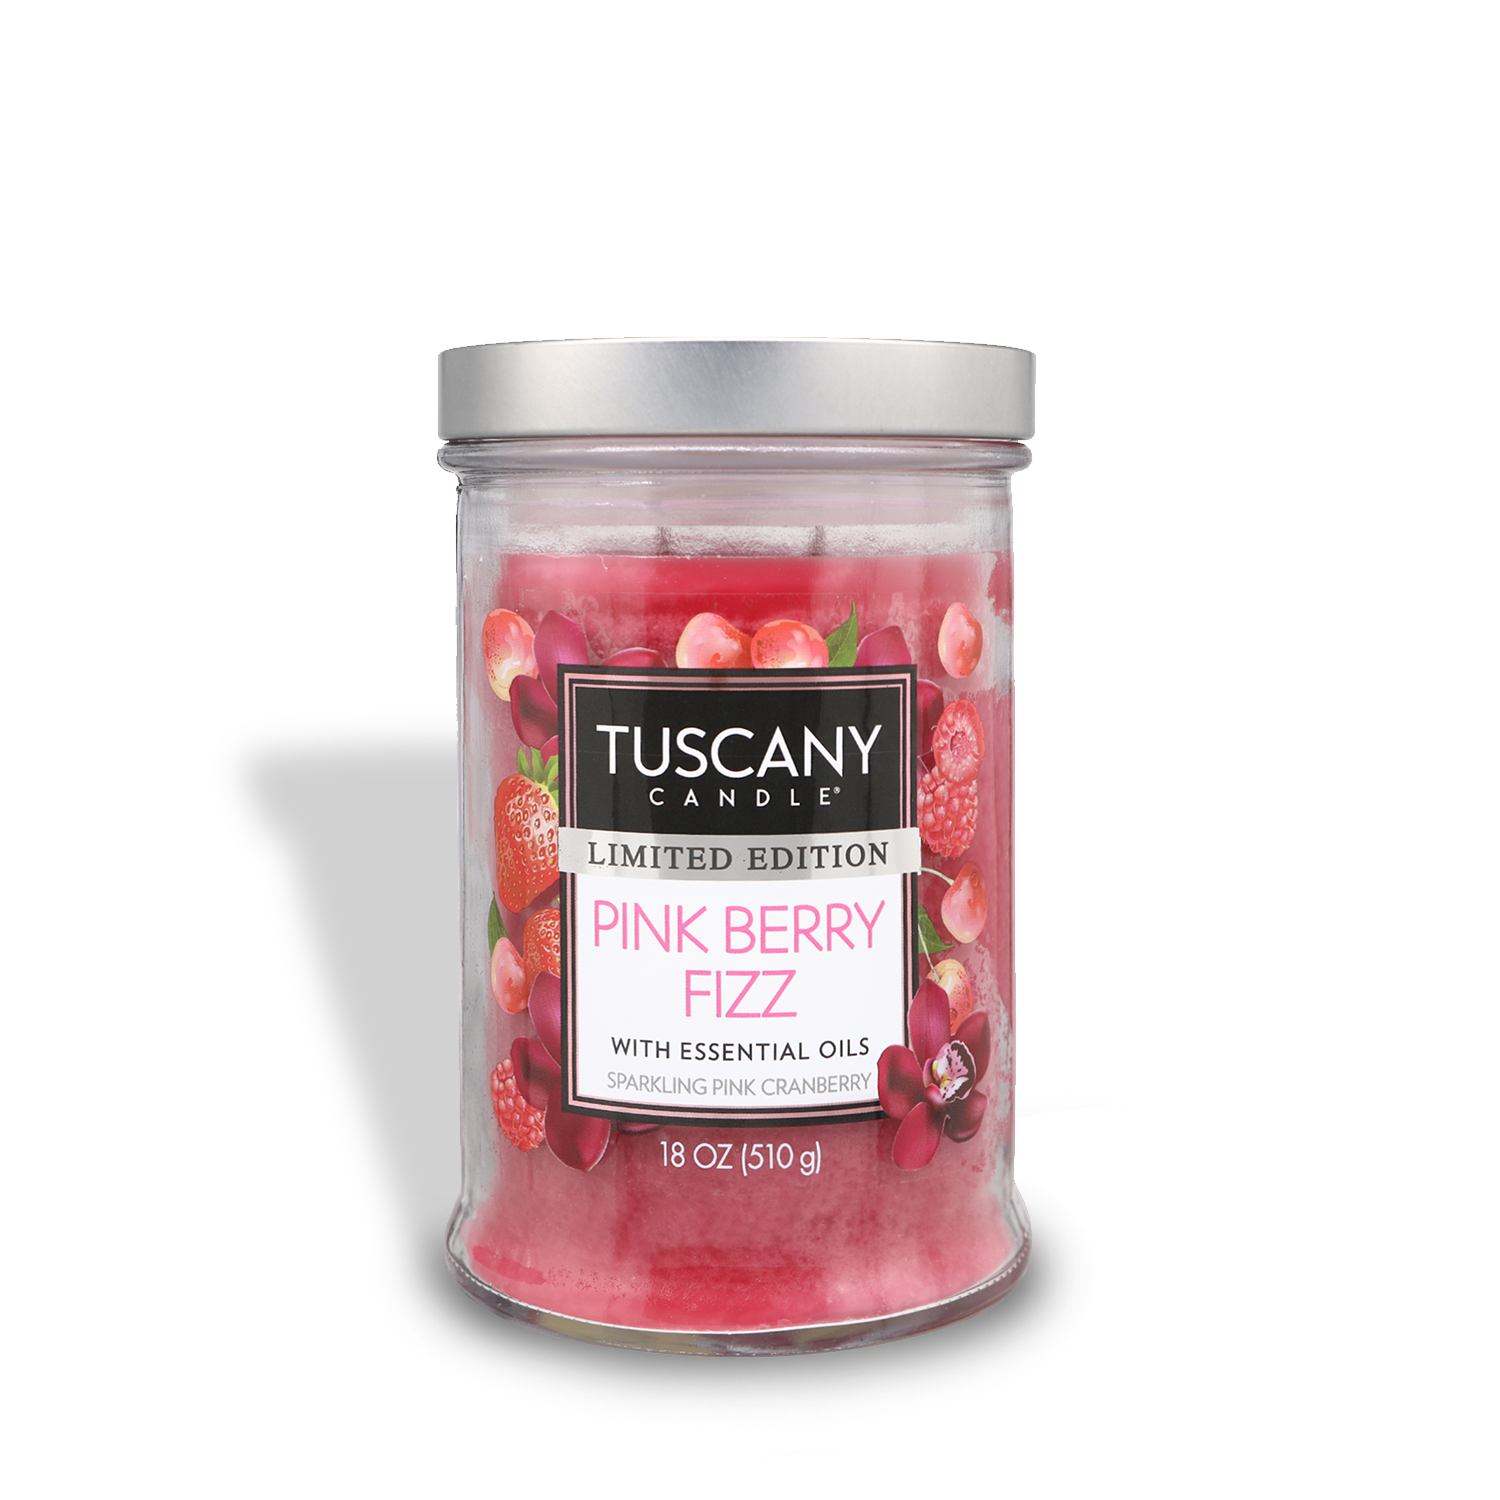 A Pink Berry Fizz Long-Lasting Scented Jar Candle (18 oz) from the Tuscany Candle® SEASONAL Collection.